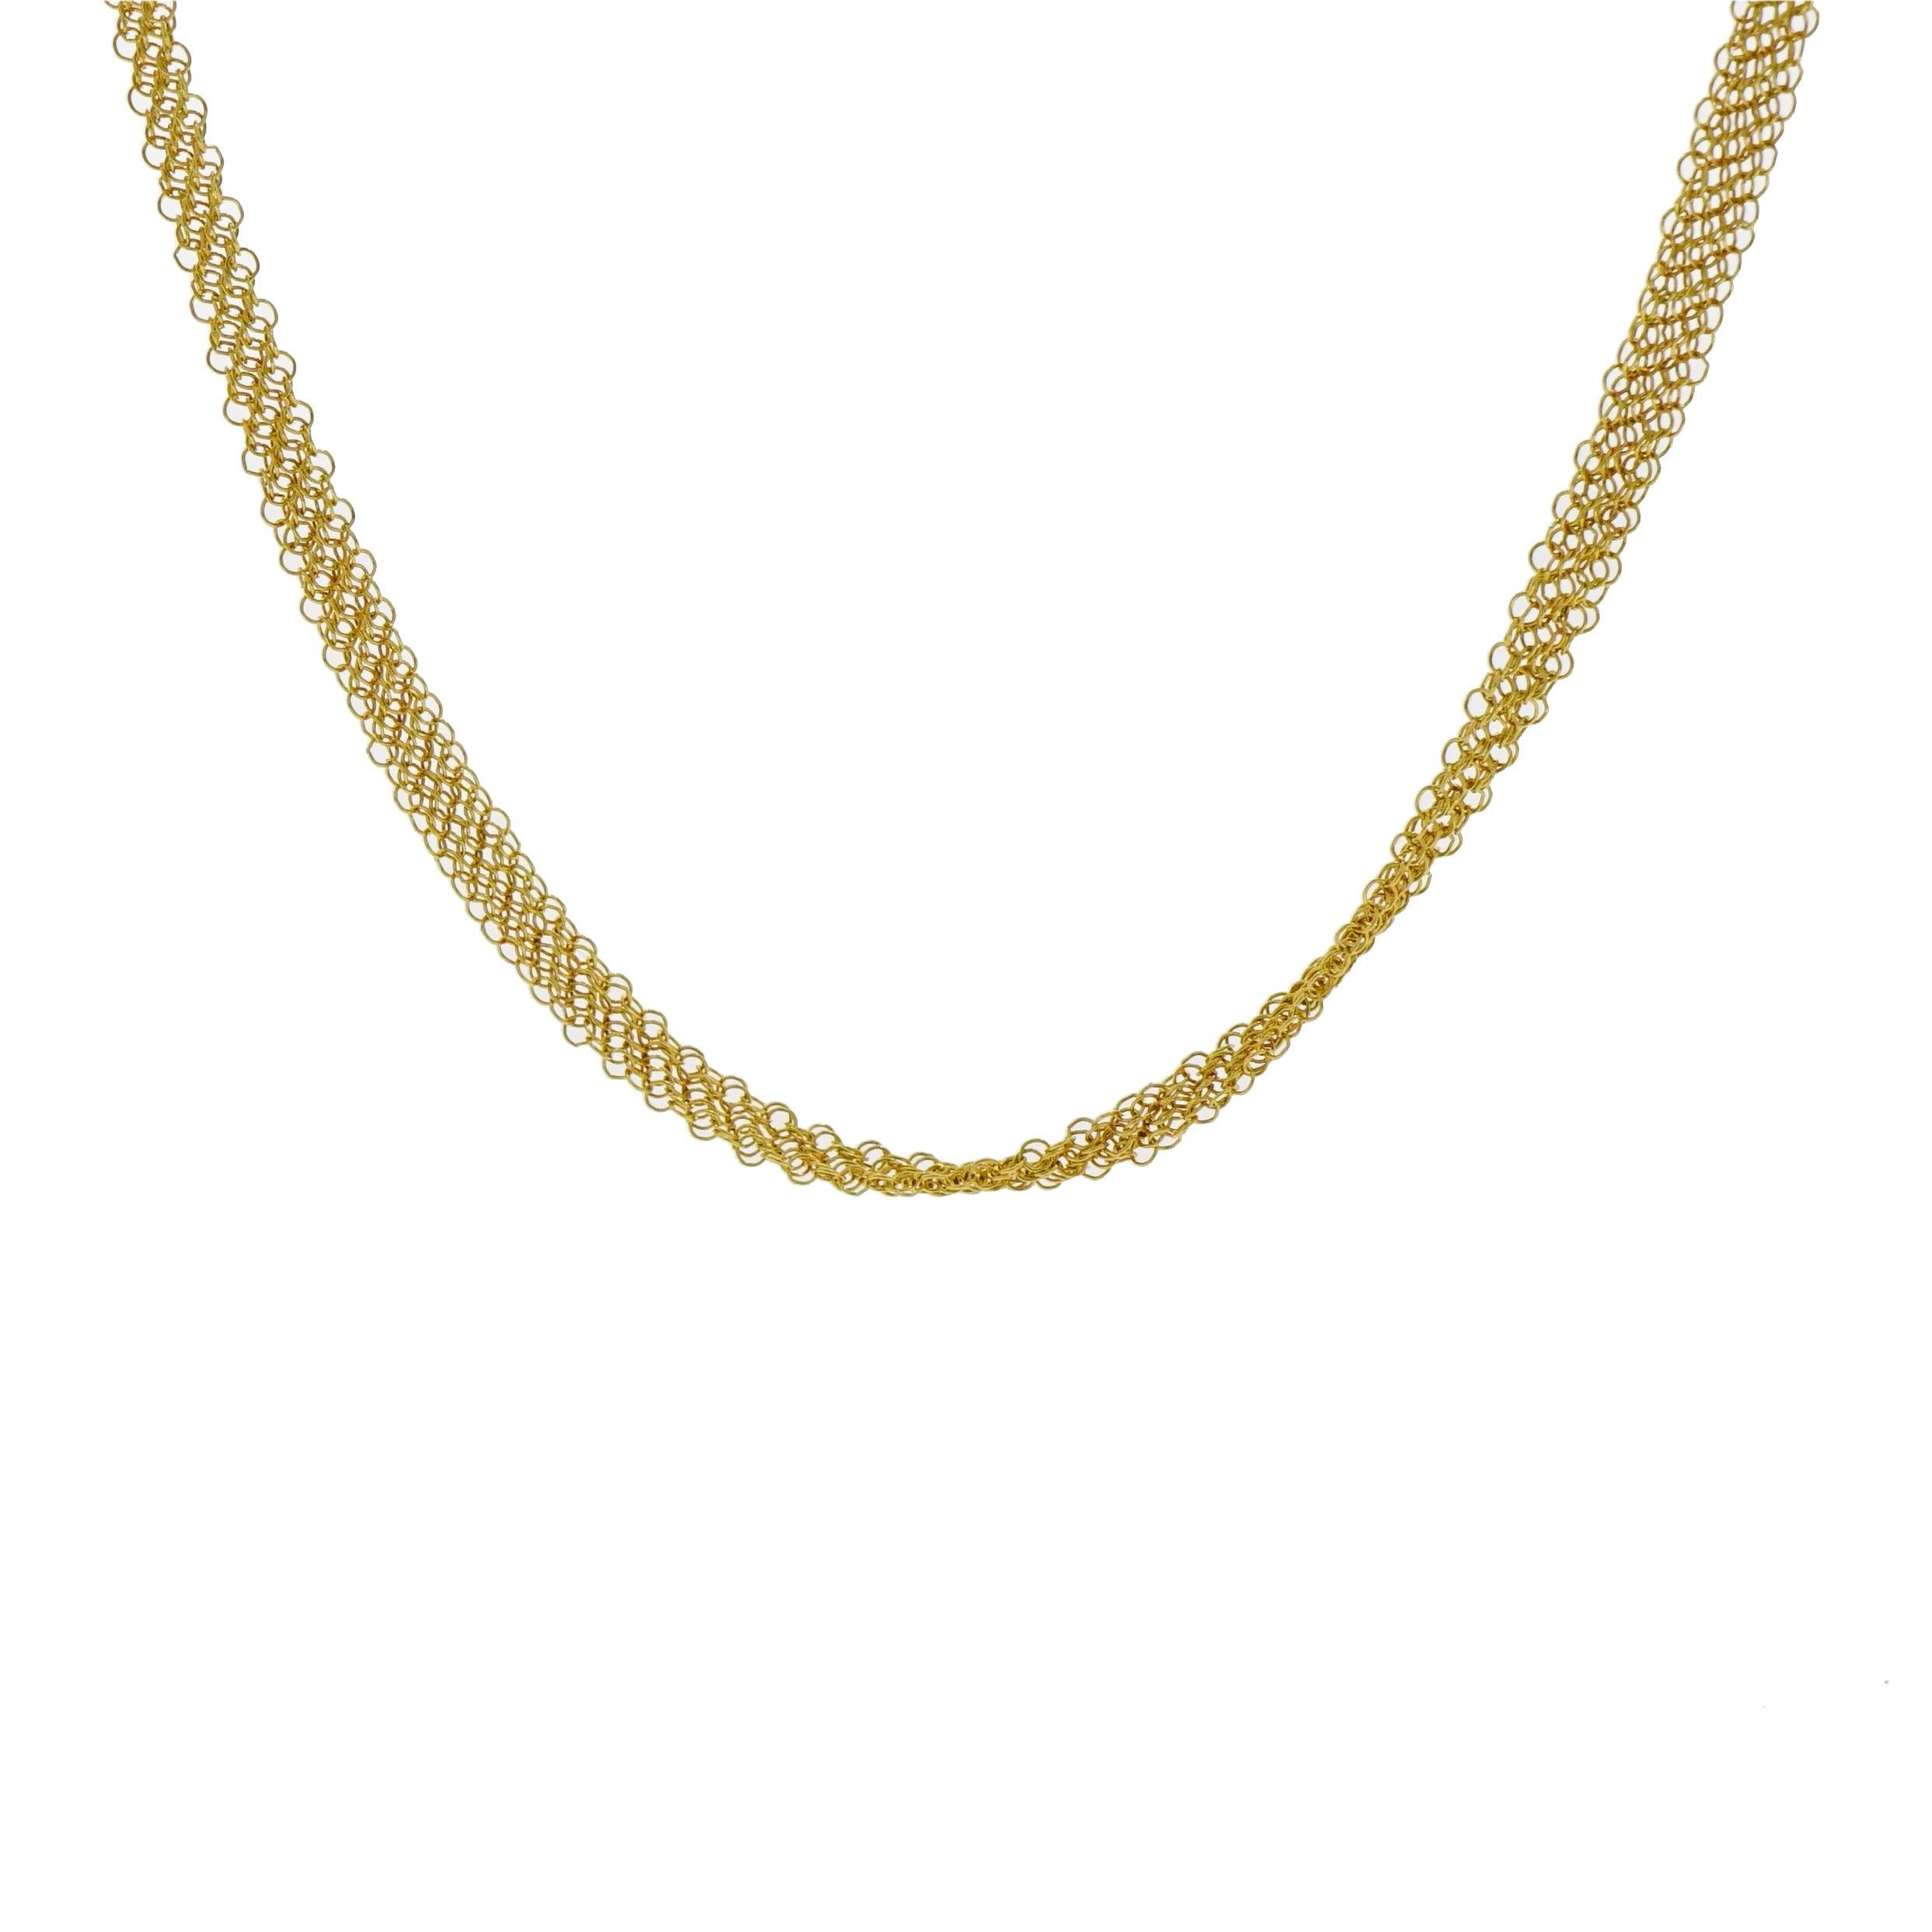 This gorgeous Yellow Gold Mesh Necklace is light and malleable in the way that drapes over the body. 
Designed by Elsa Peretti for Tiffany & Co. in 18k Yellow Gold, measures 30 inches long and weighs 11 Grams.
The Perfect addition to your collection!